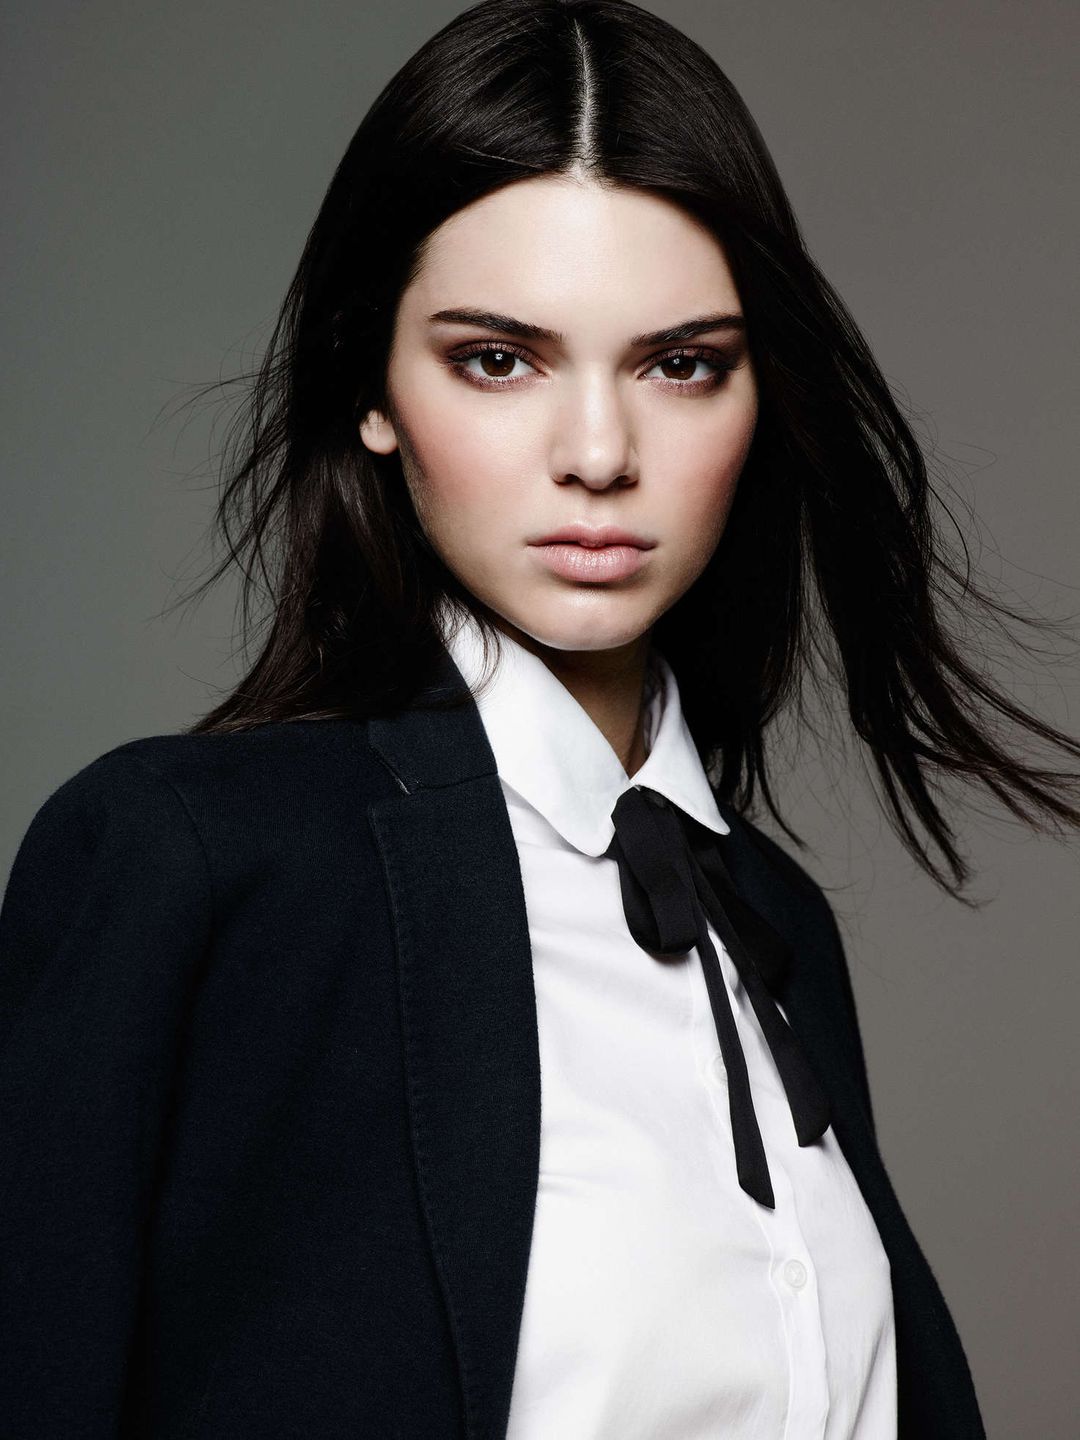 Kendall Jenner age